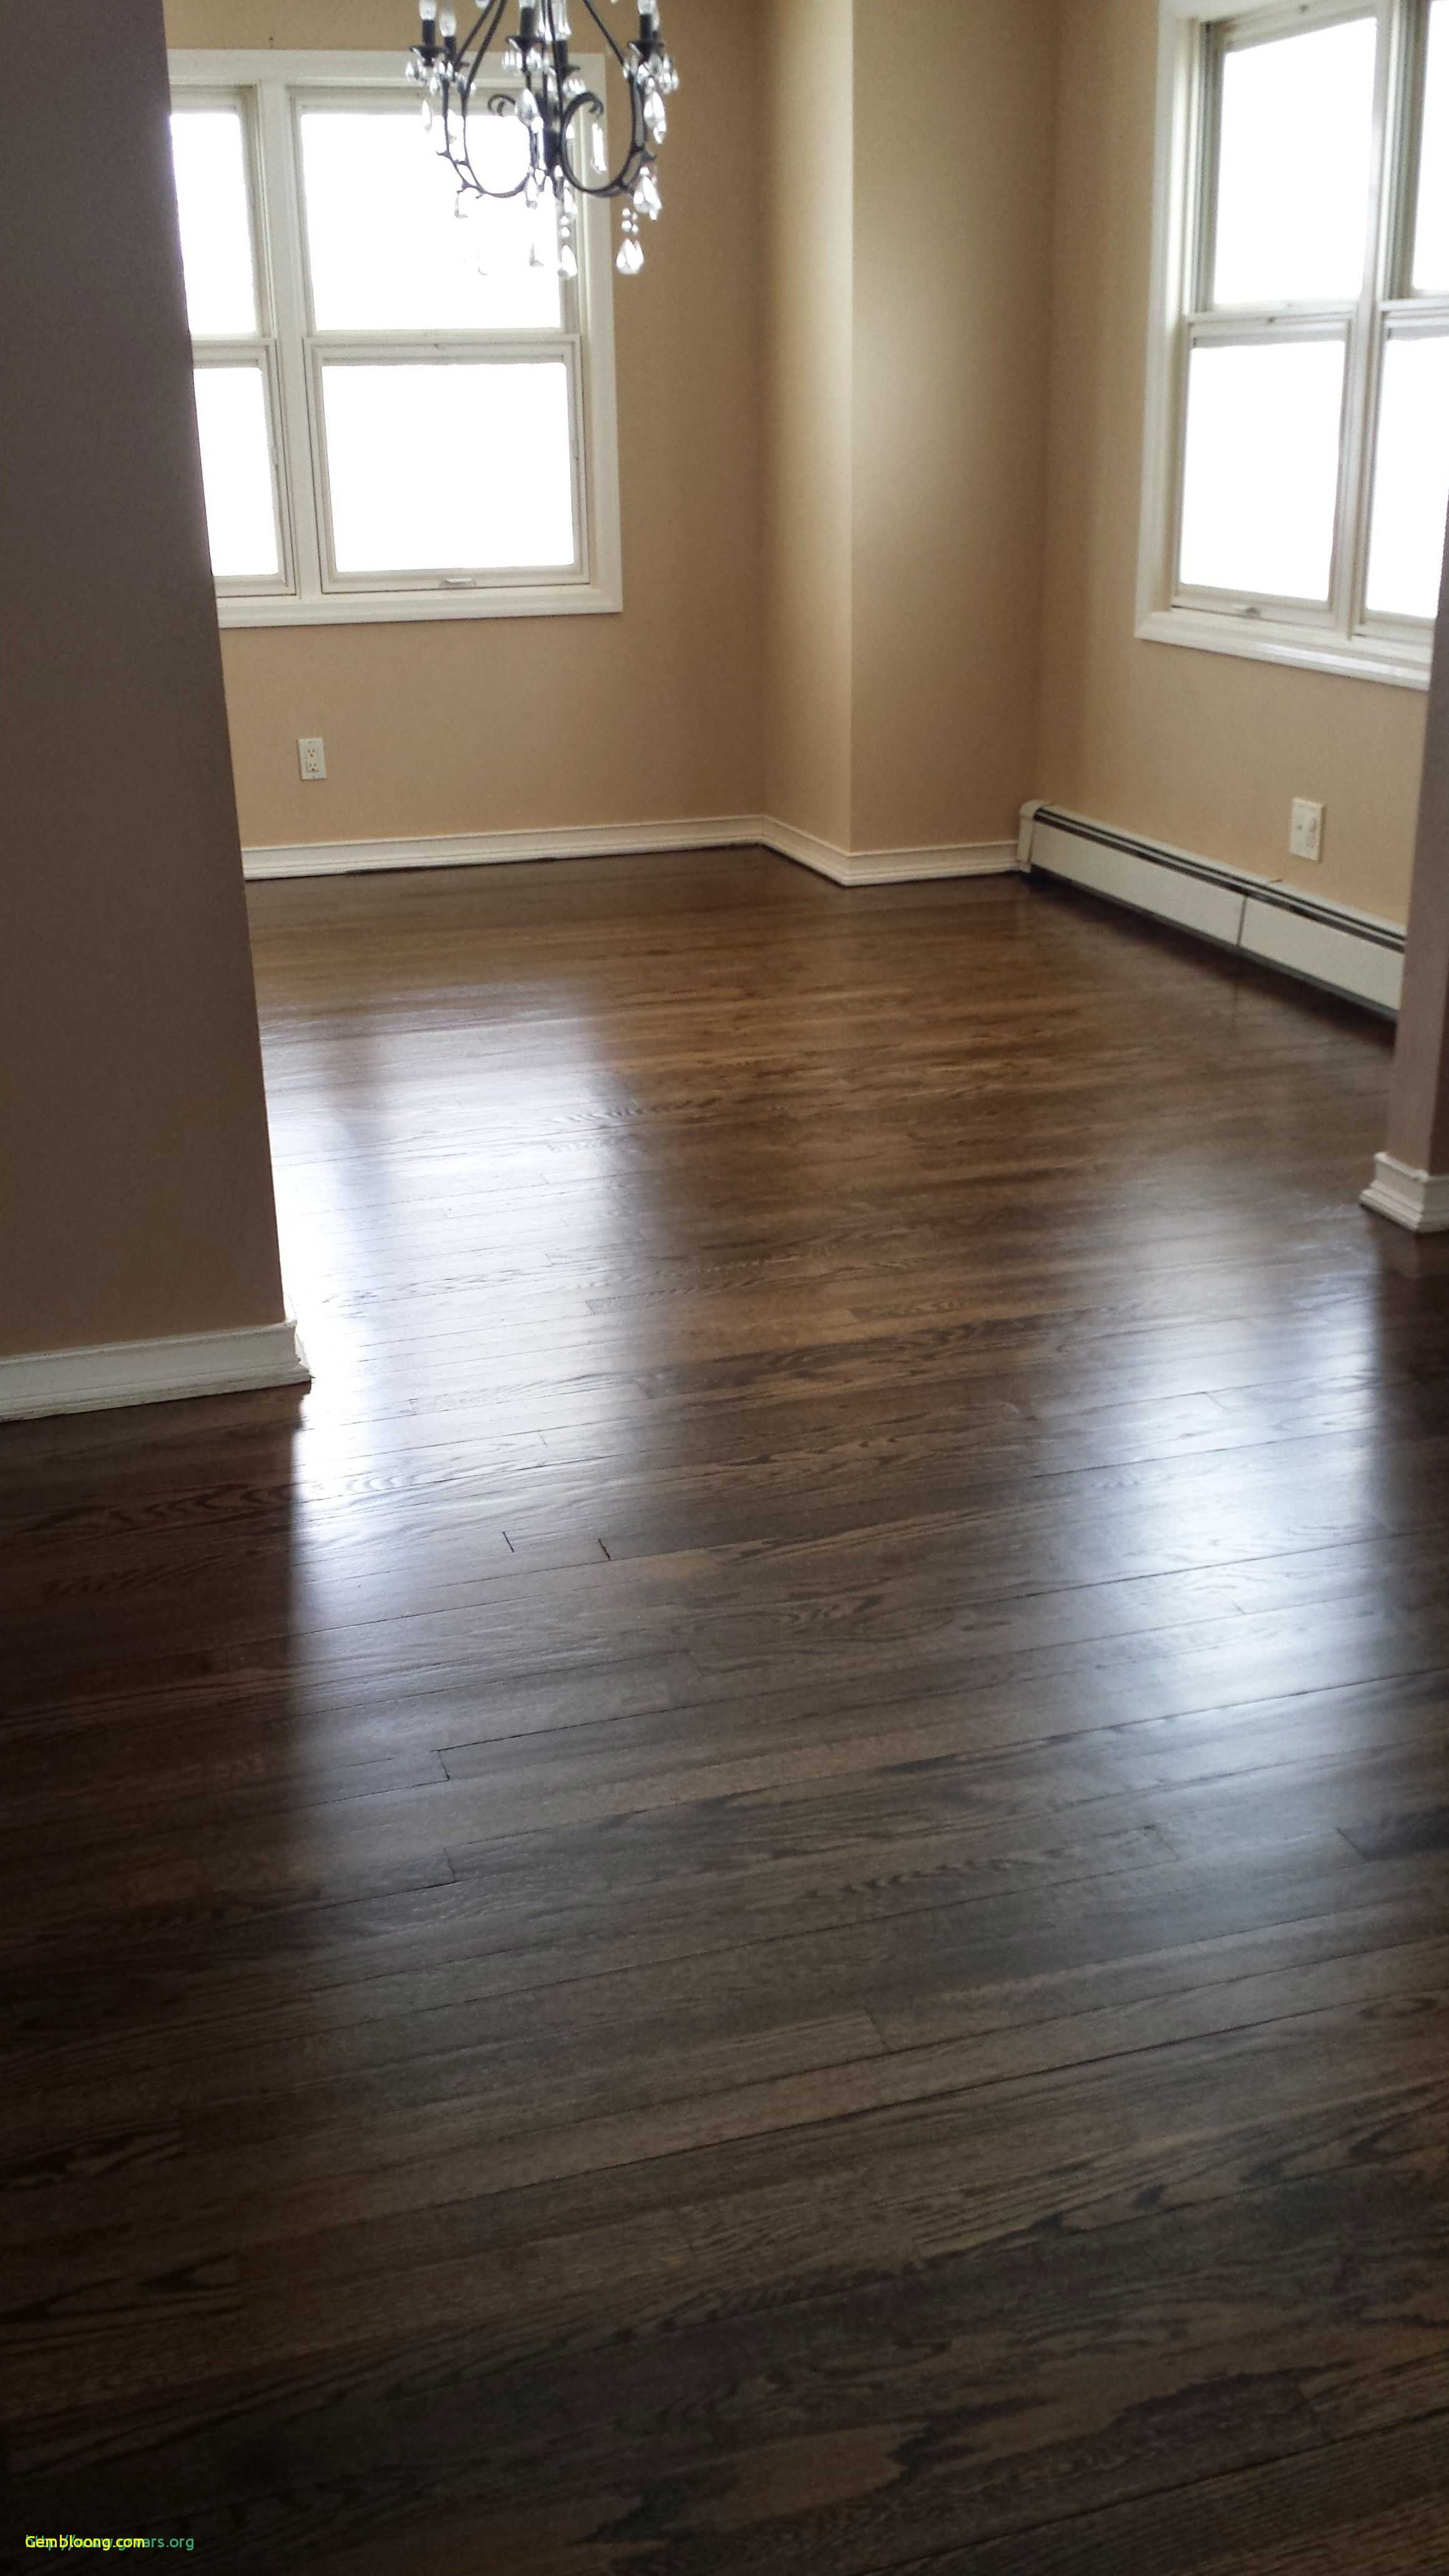 26 Recommended Hardwood Flooring Stores In Dalton Ga 2024 free download hardwood flooring stores in dalton ga of 20 beautiful discount flooring near me flooring ideas throughout 20 s of the 20 charmant how to refinish hardwood floors cheap